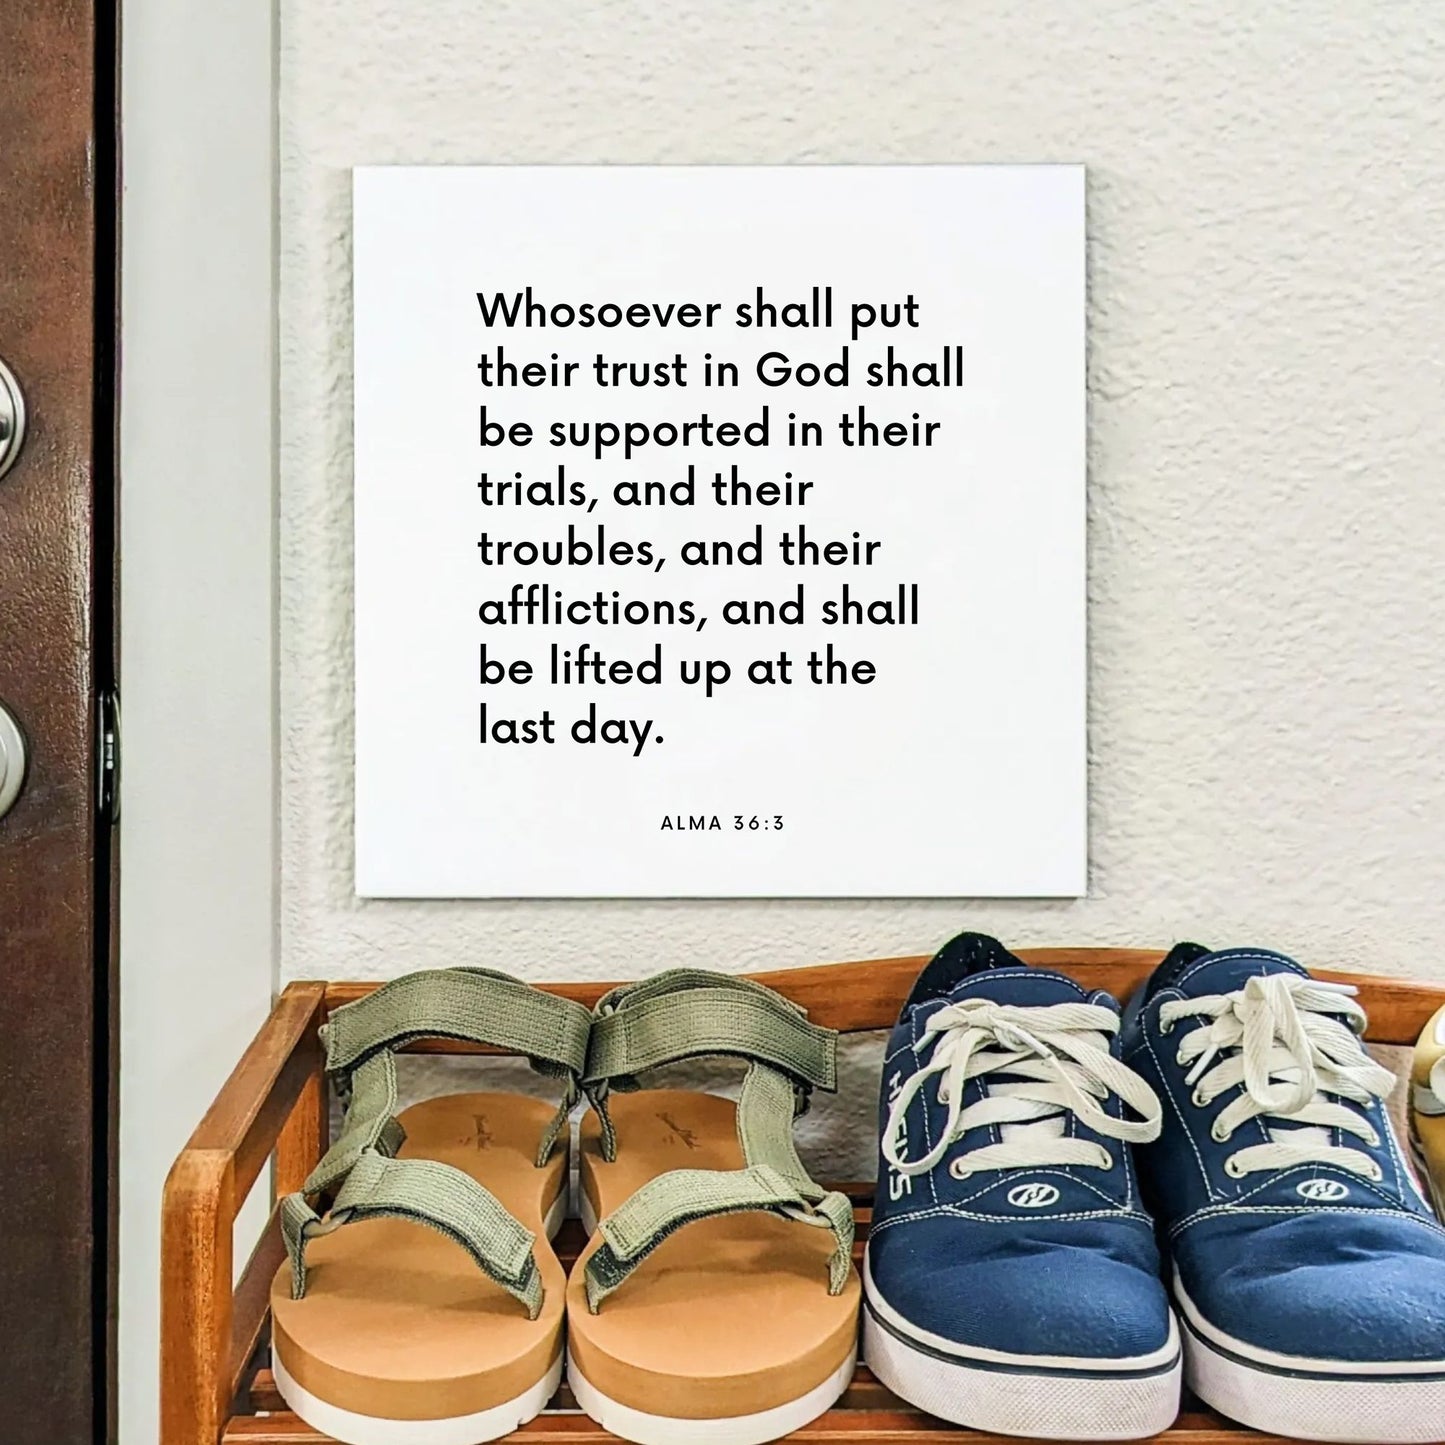 Shoes mouting of the scripture tile for Alma 36:3 - "Whosoever shall put their trust in God"